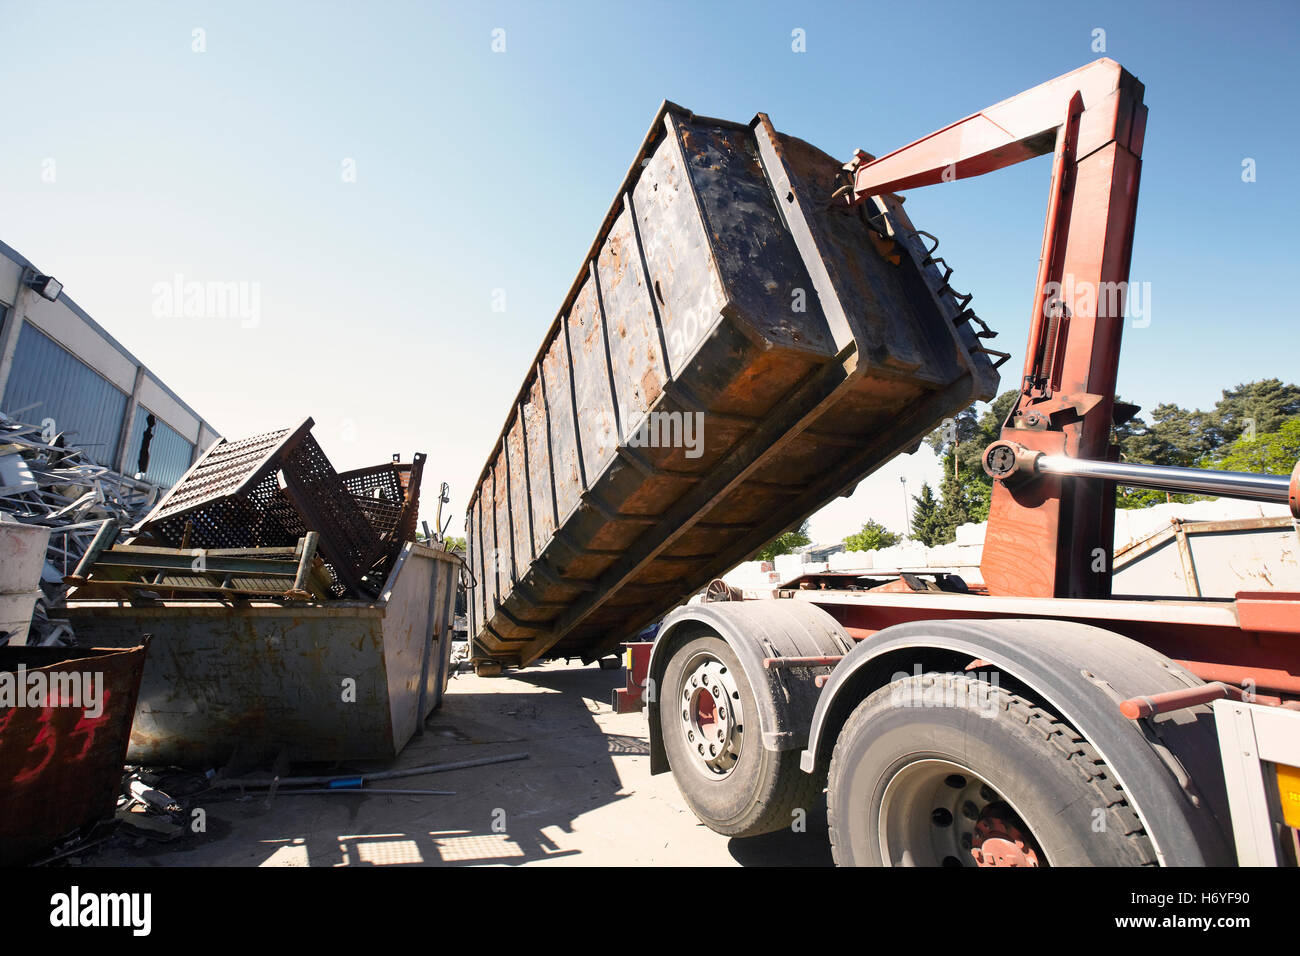 Unloading skip in scrap metal yard  Image downloaded by   at 10:17 on the 14/06/15 Stock Photo